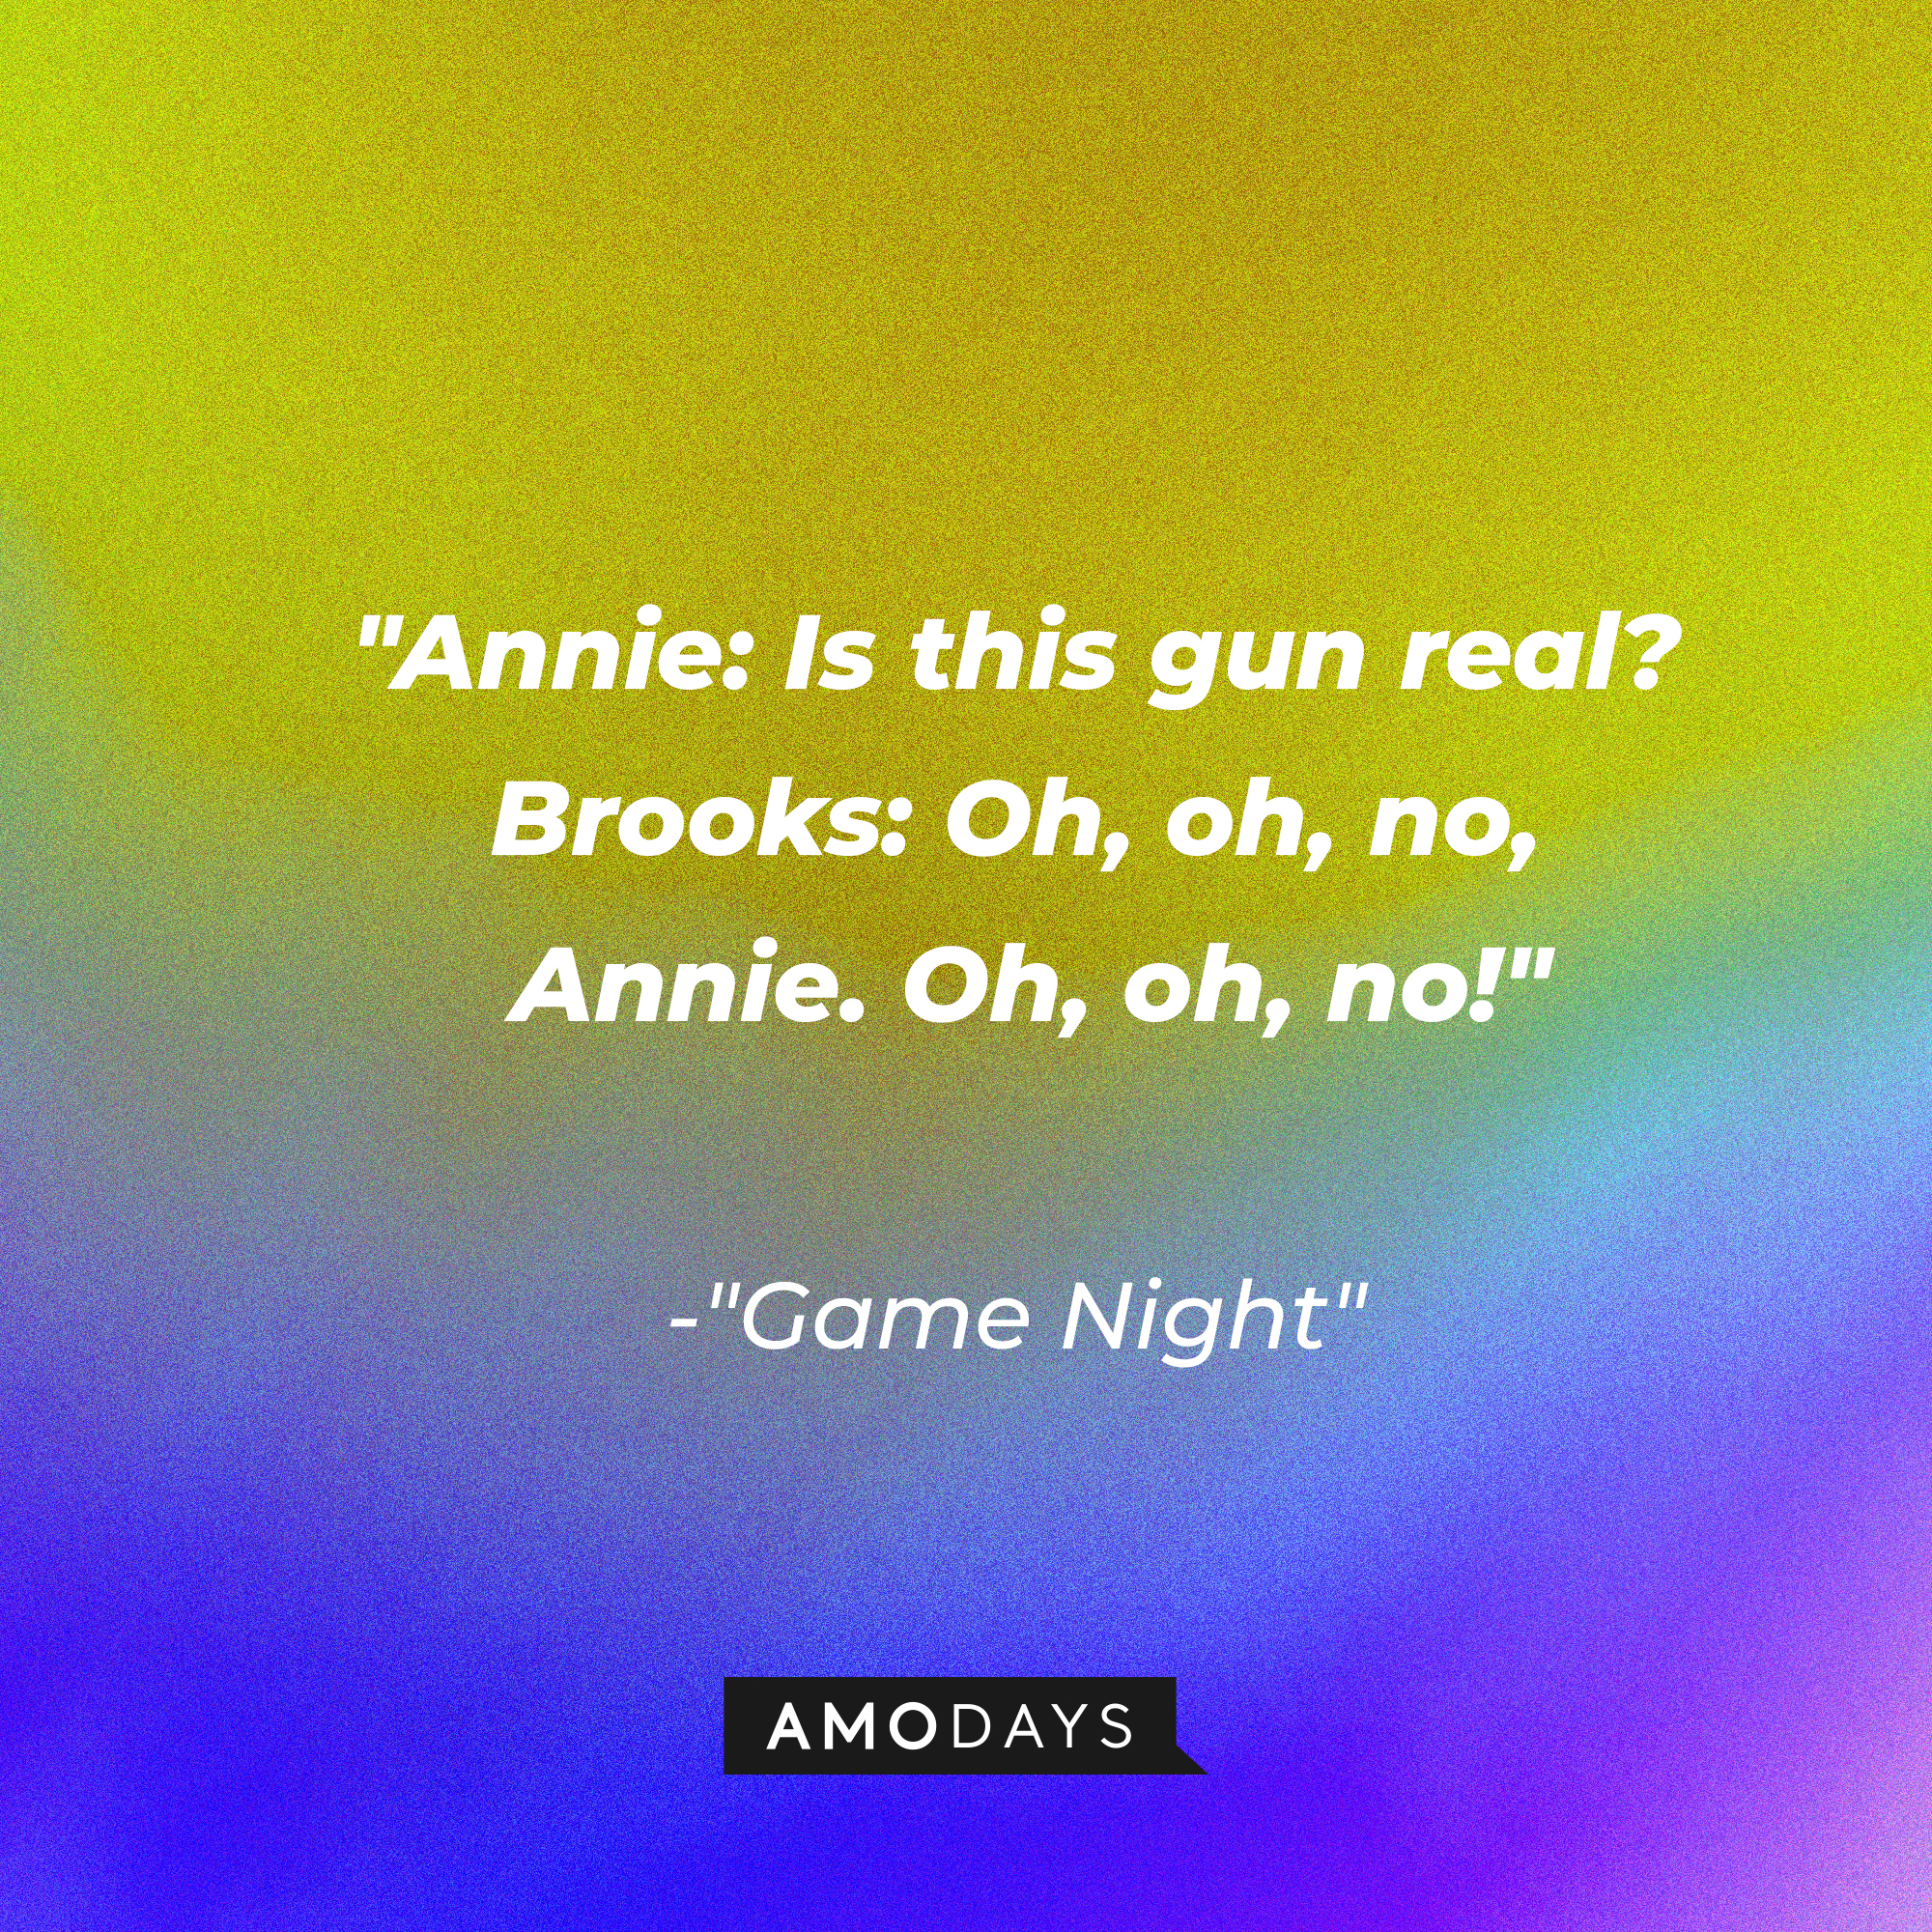 Quote from “Game Night”: “Annie: Is this gun real? Brooks: Oh, oh, no, Annie. Oh, oh, no!” | Source: AmoDays